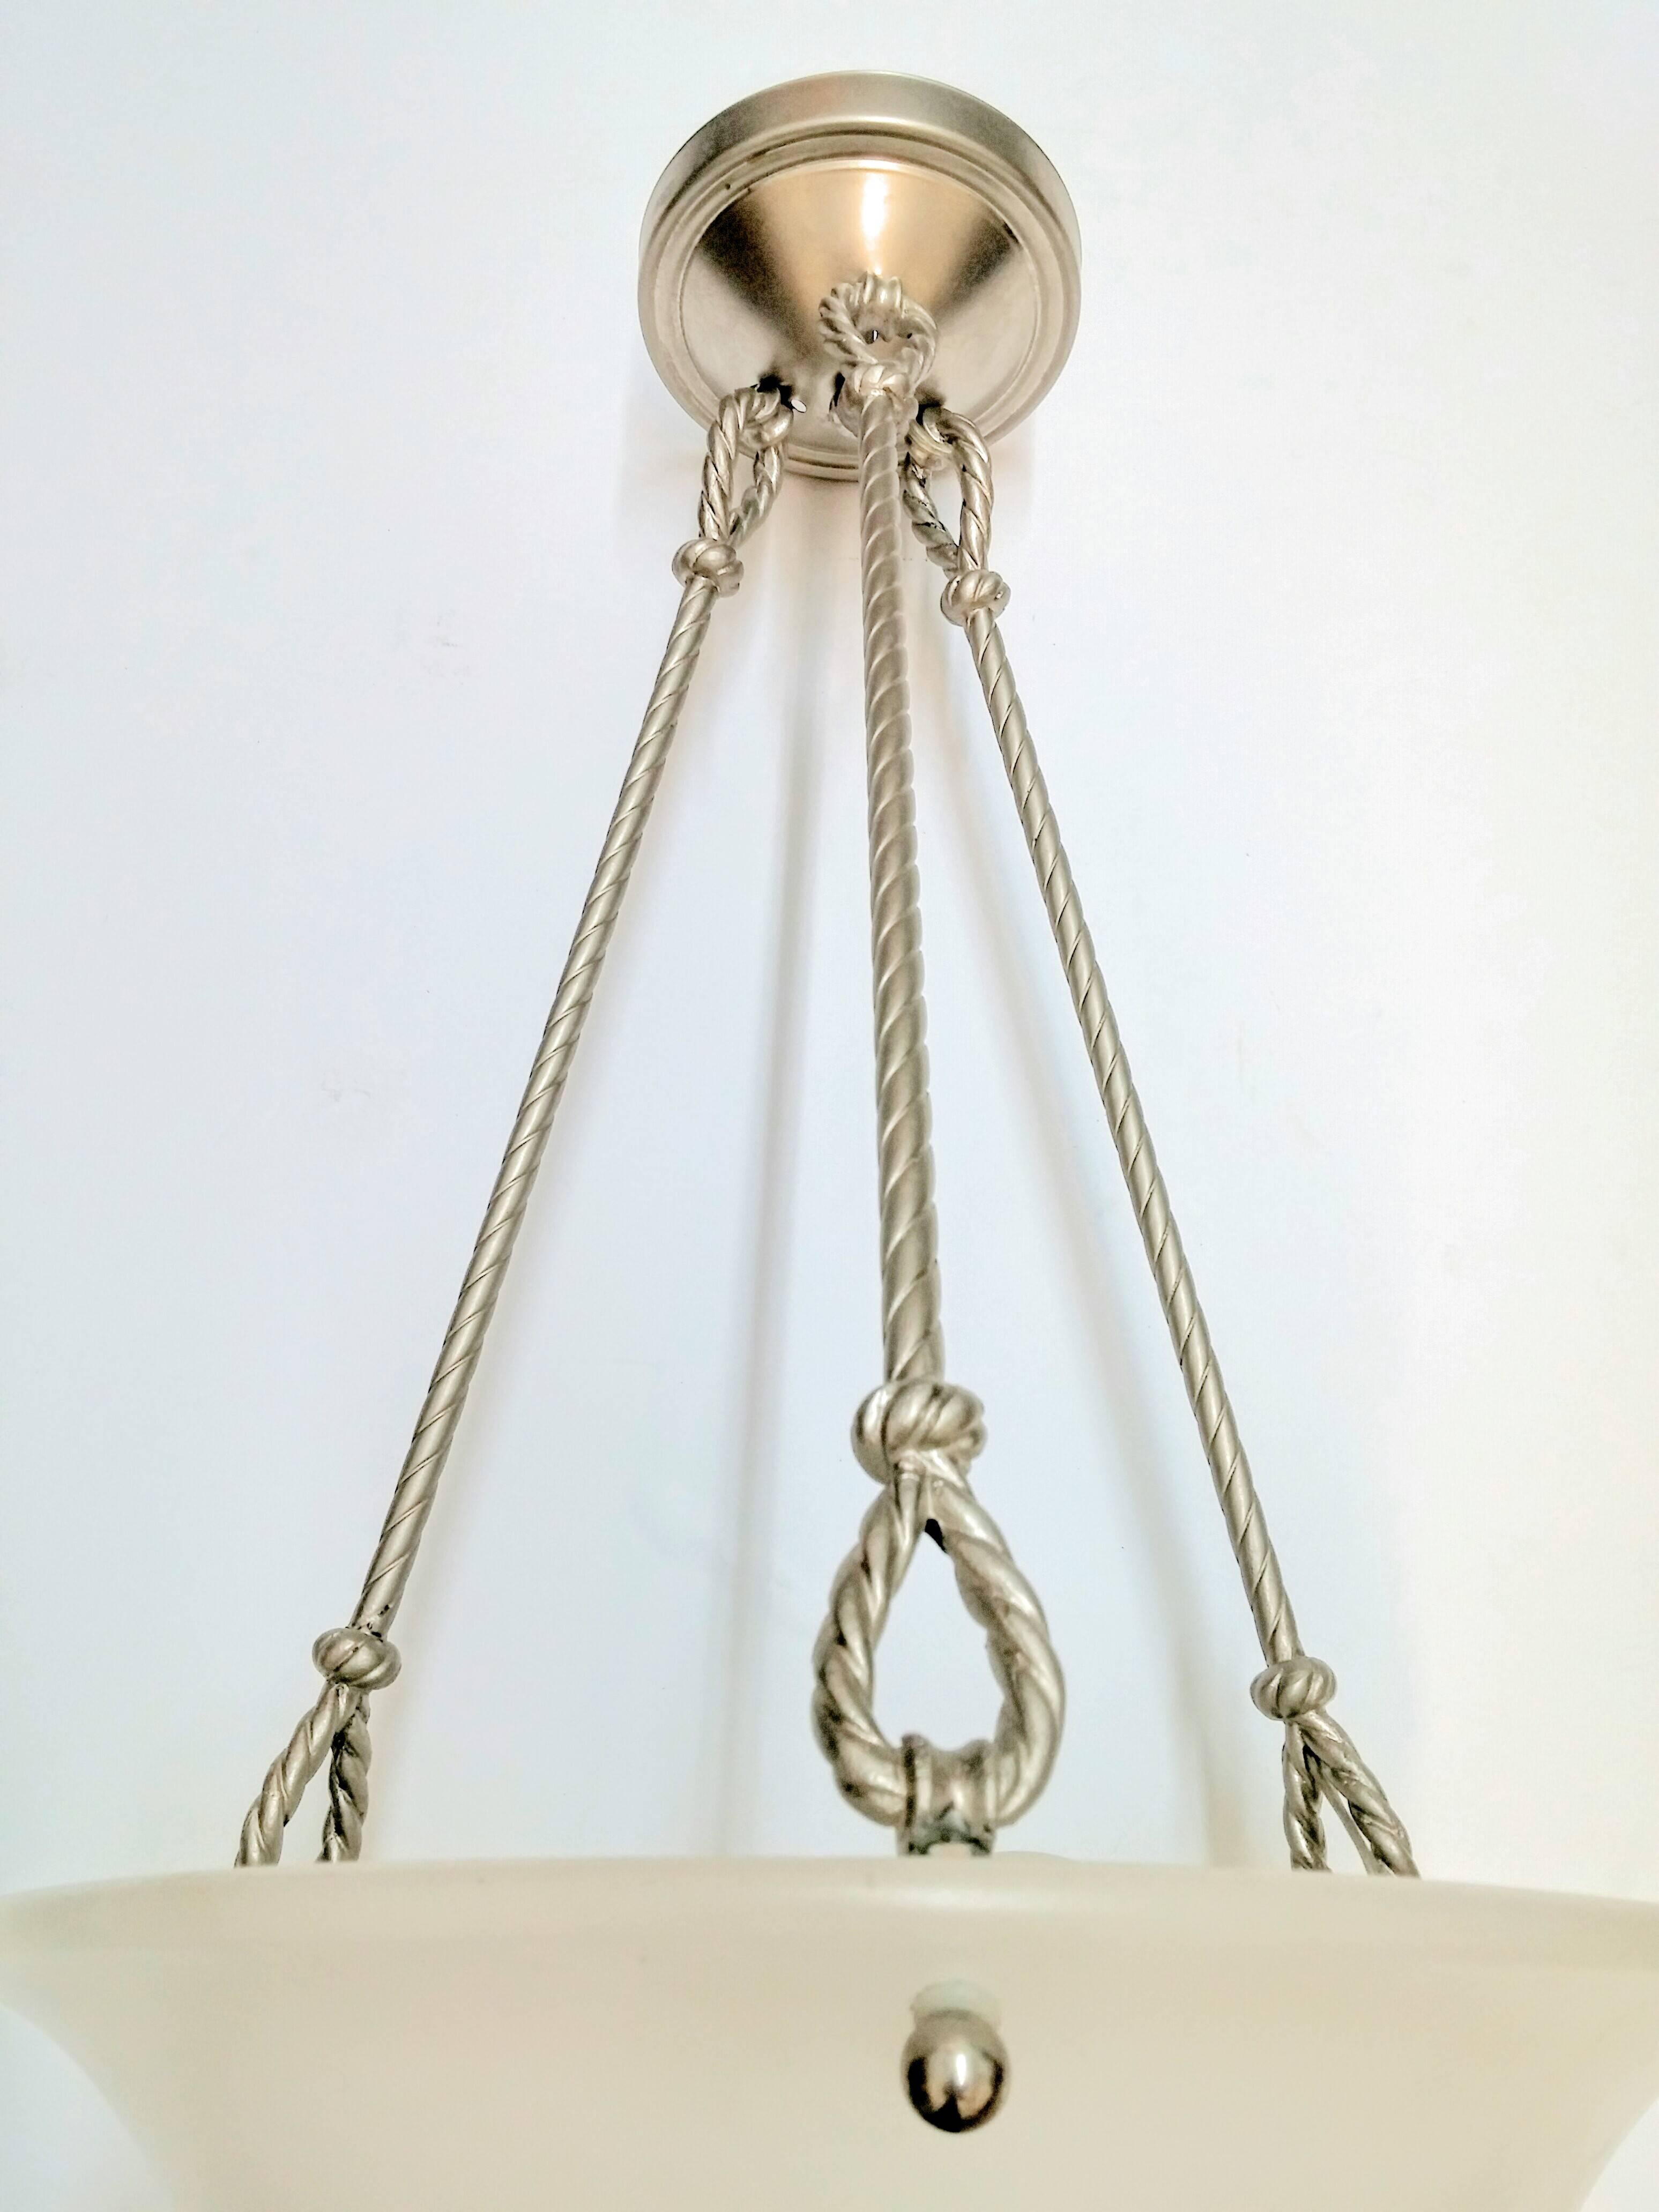 
A French Art Deco pendant chandelier with a concave frosted glass or alabaster shade supported by four rods of rope design with a smooth canopy in nickel. The pendant can be re-plated or shortened upon request at no additional charge. Alabaster